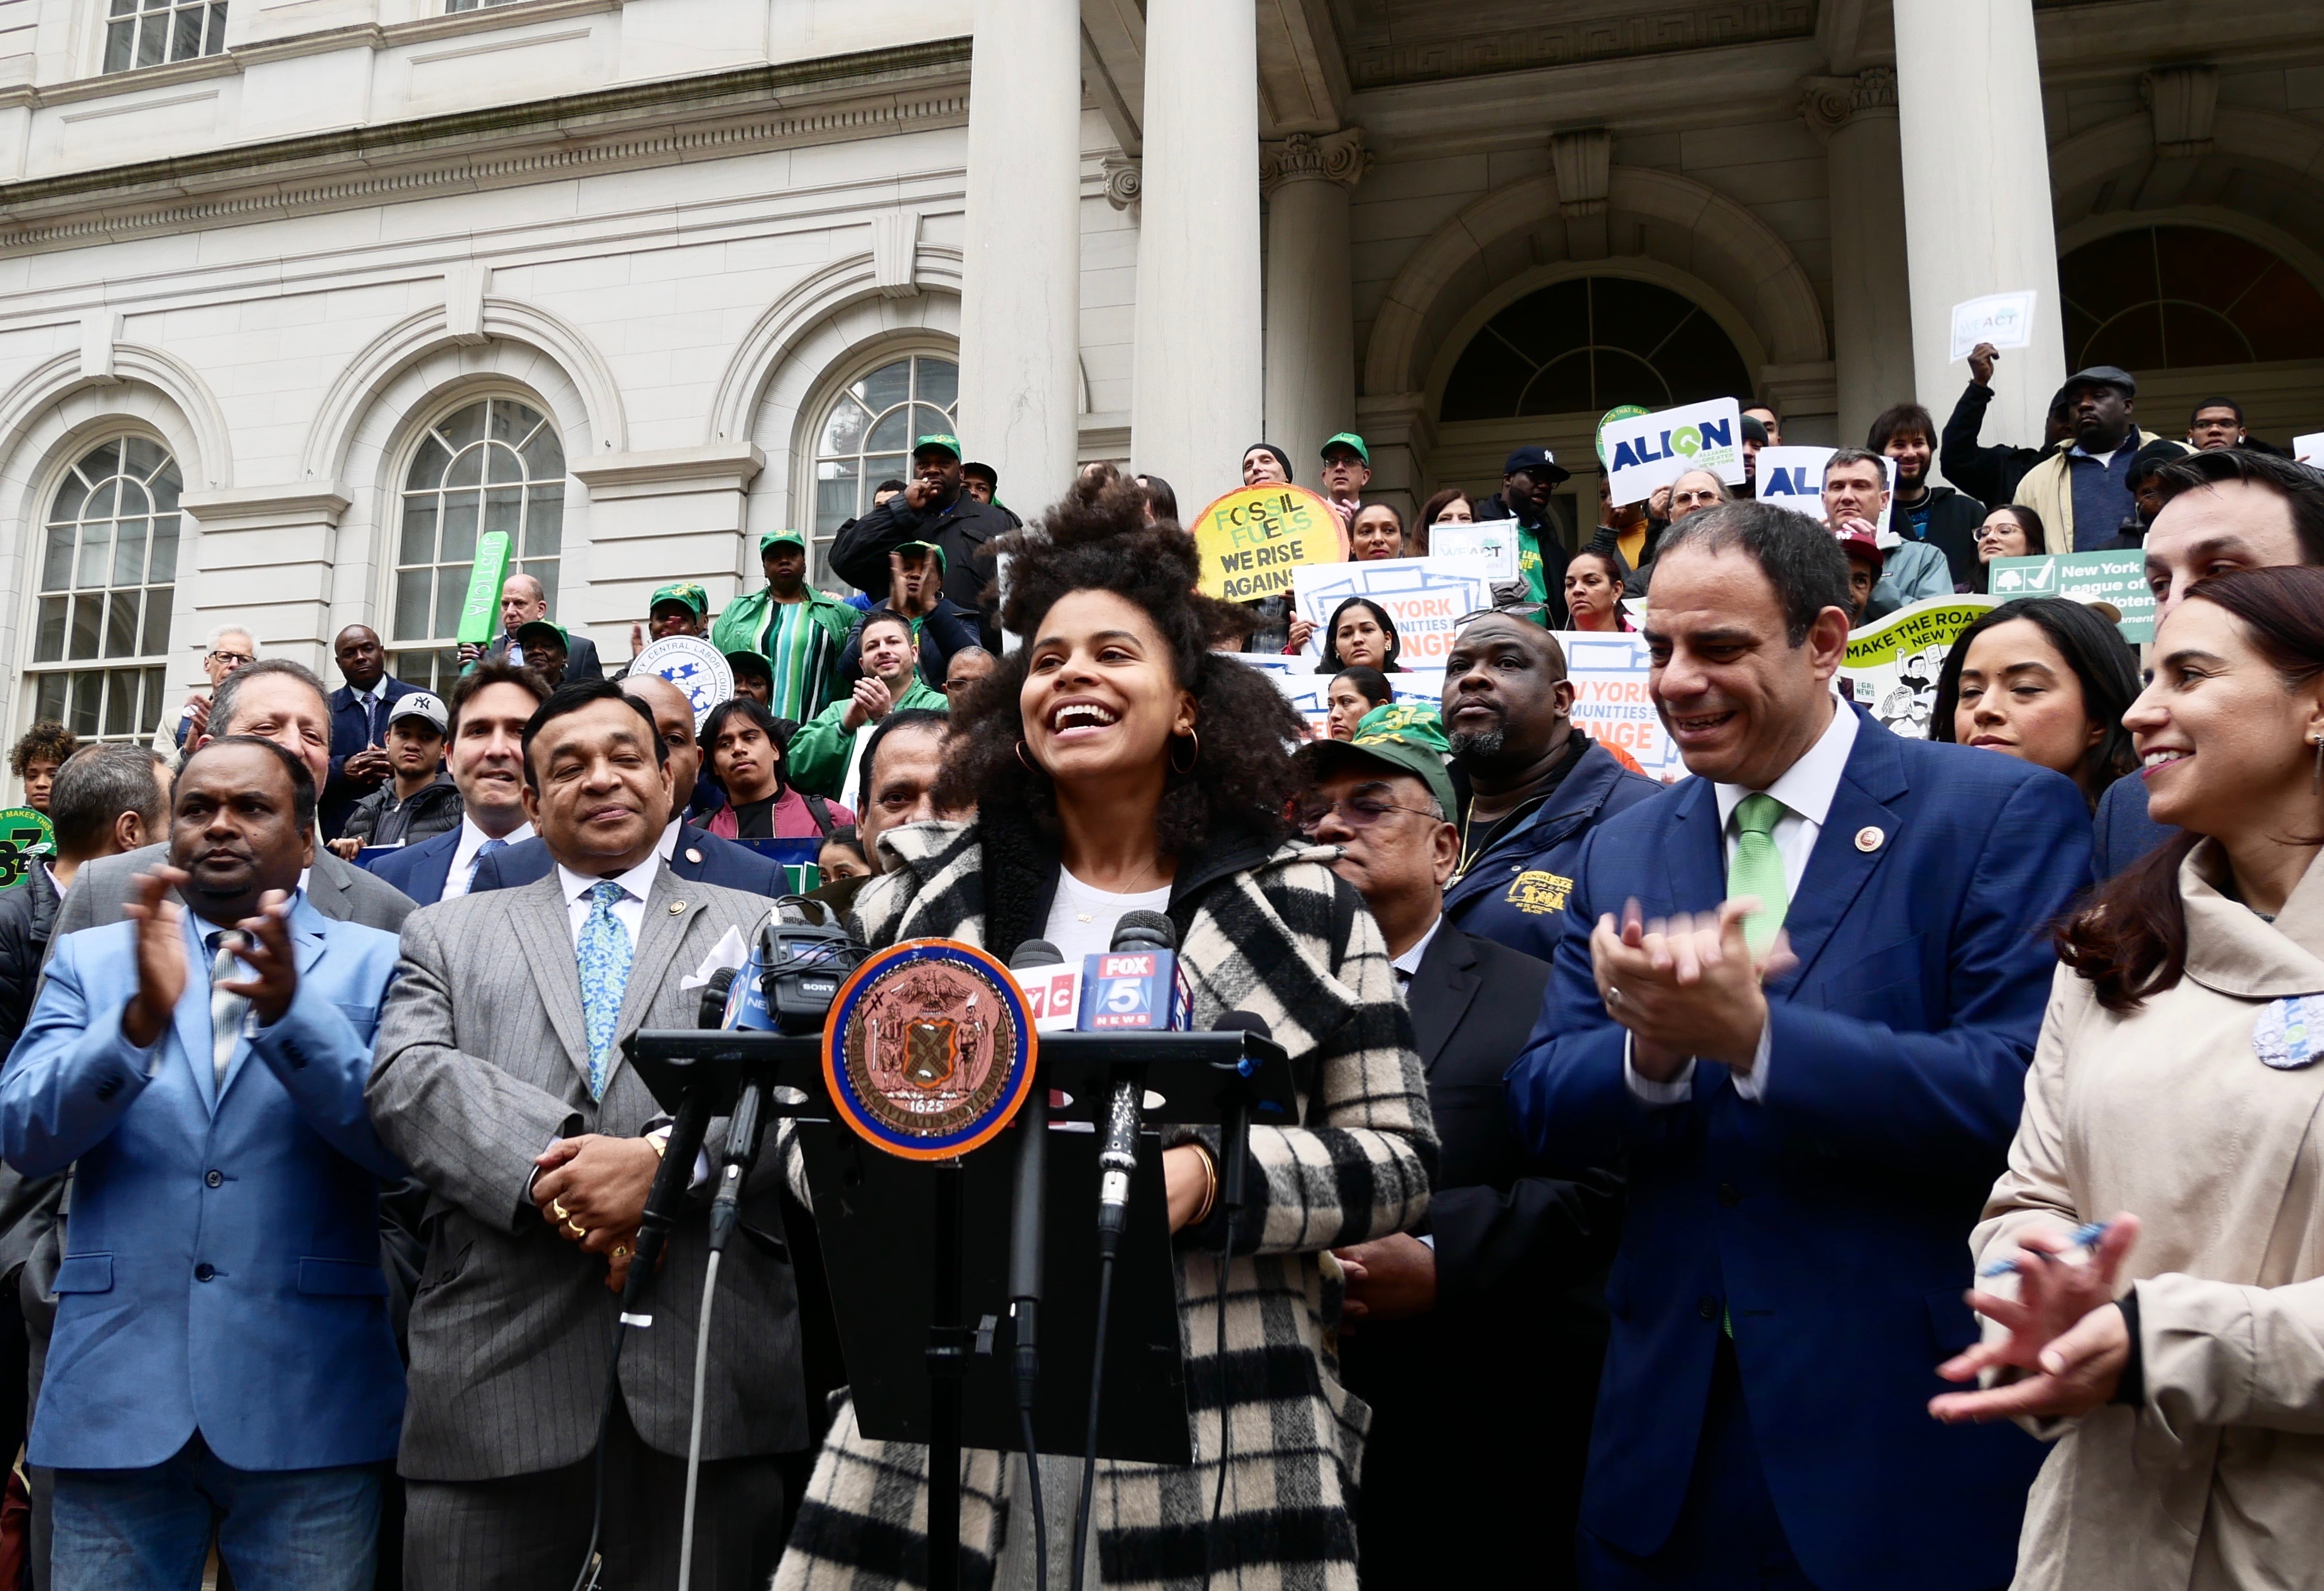 Zazie Beetz speaks in front of a podium and a crowd of people in front of New York City Hall in support of climate change legislation.